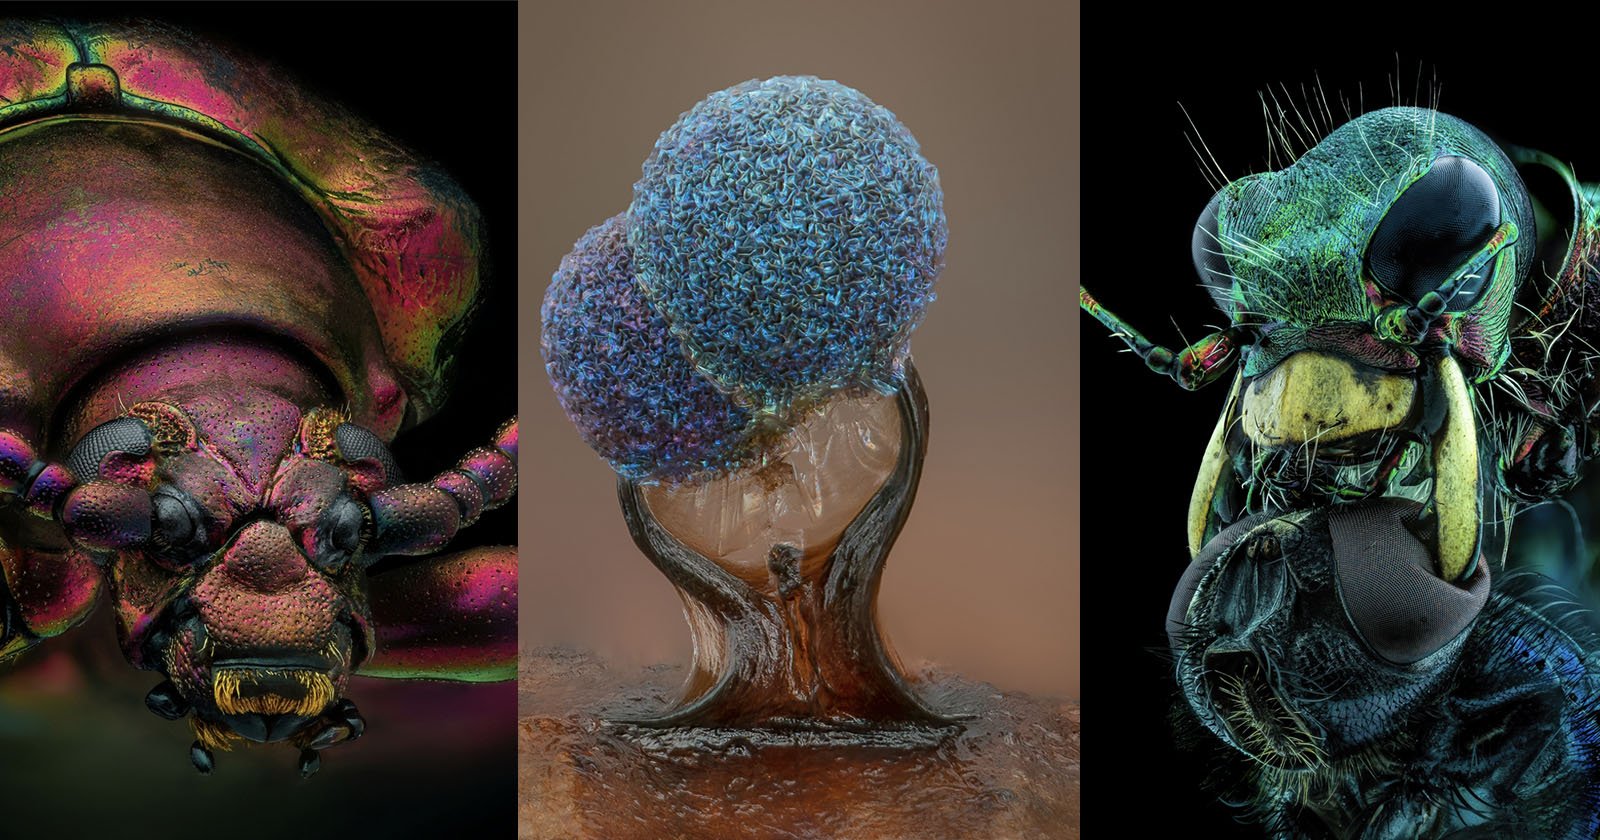 The Winners of the 2022 Nikon Small World Competition